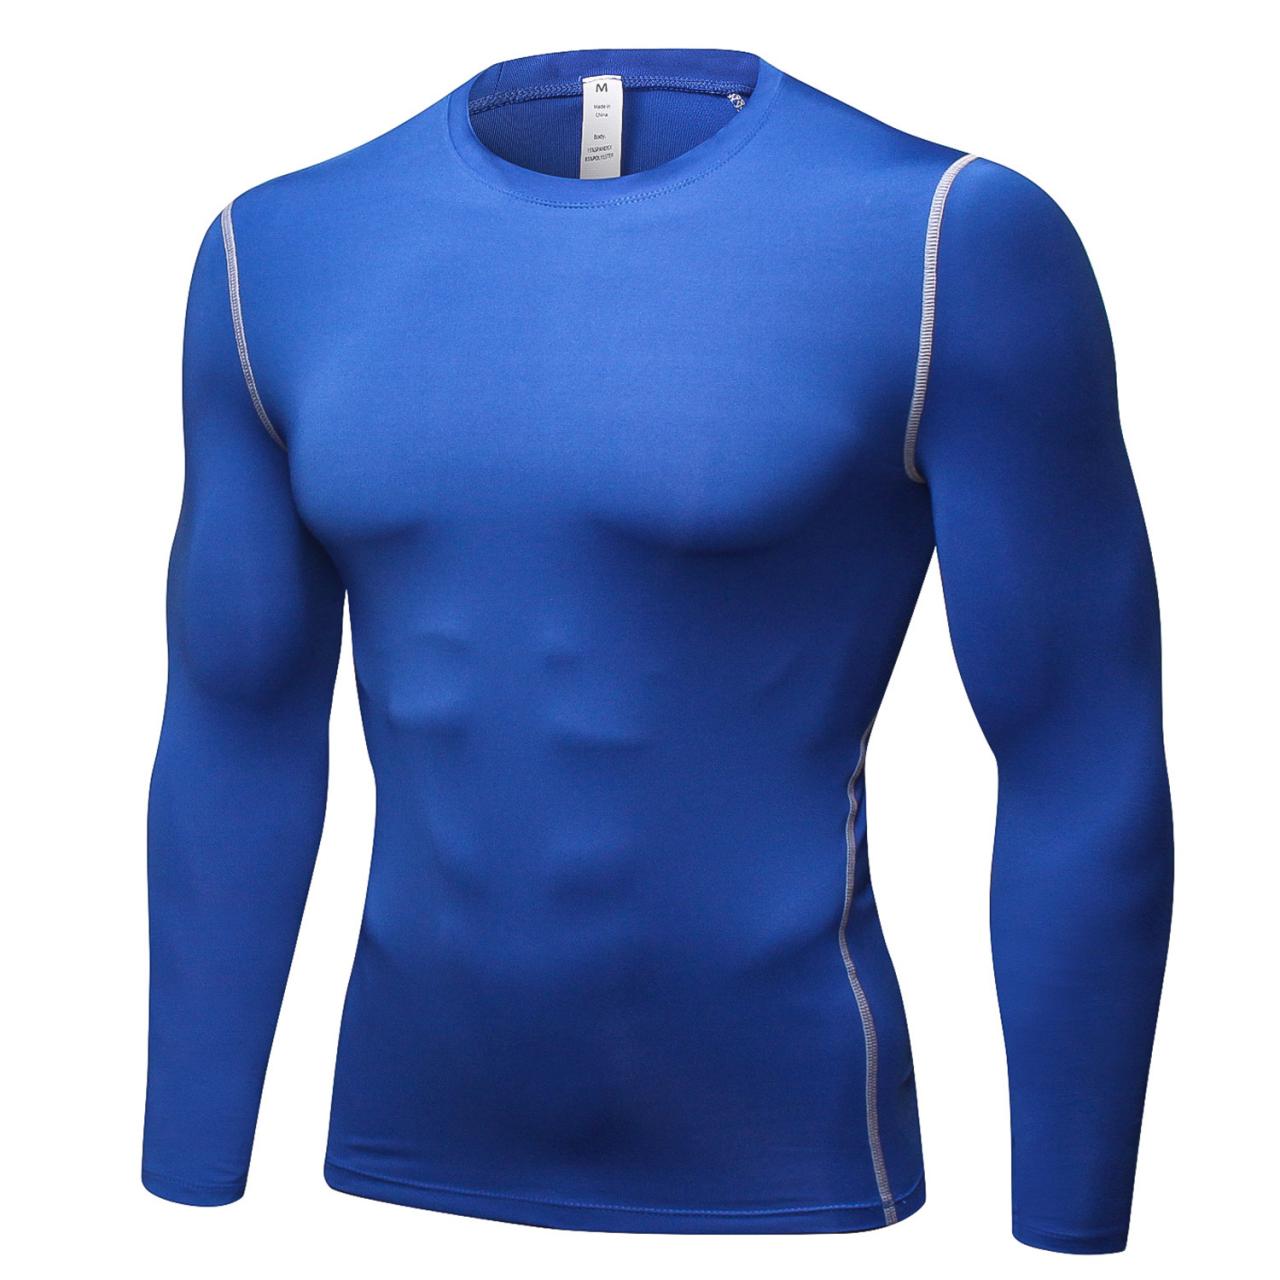 Men Pro Quick Dry Fitness Sport Run Yoga Exercise GYM Top Compression Tee Basketball Workout Hiking Board T Shirt blue